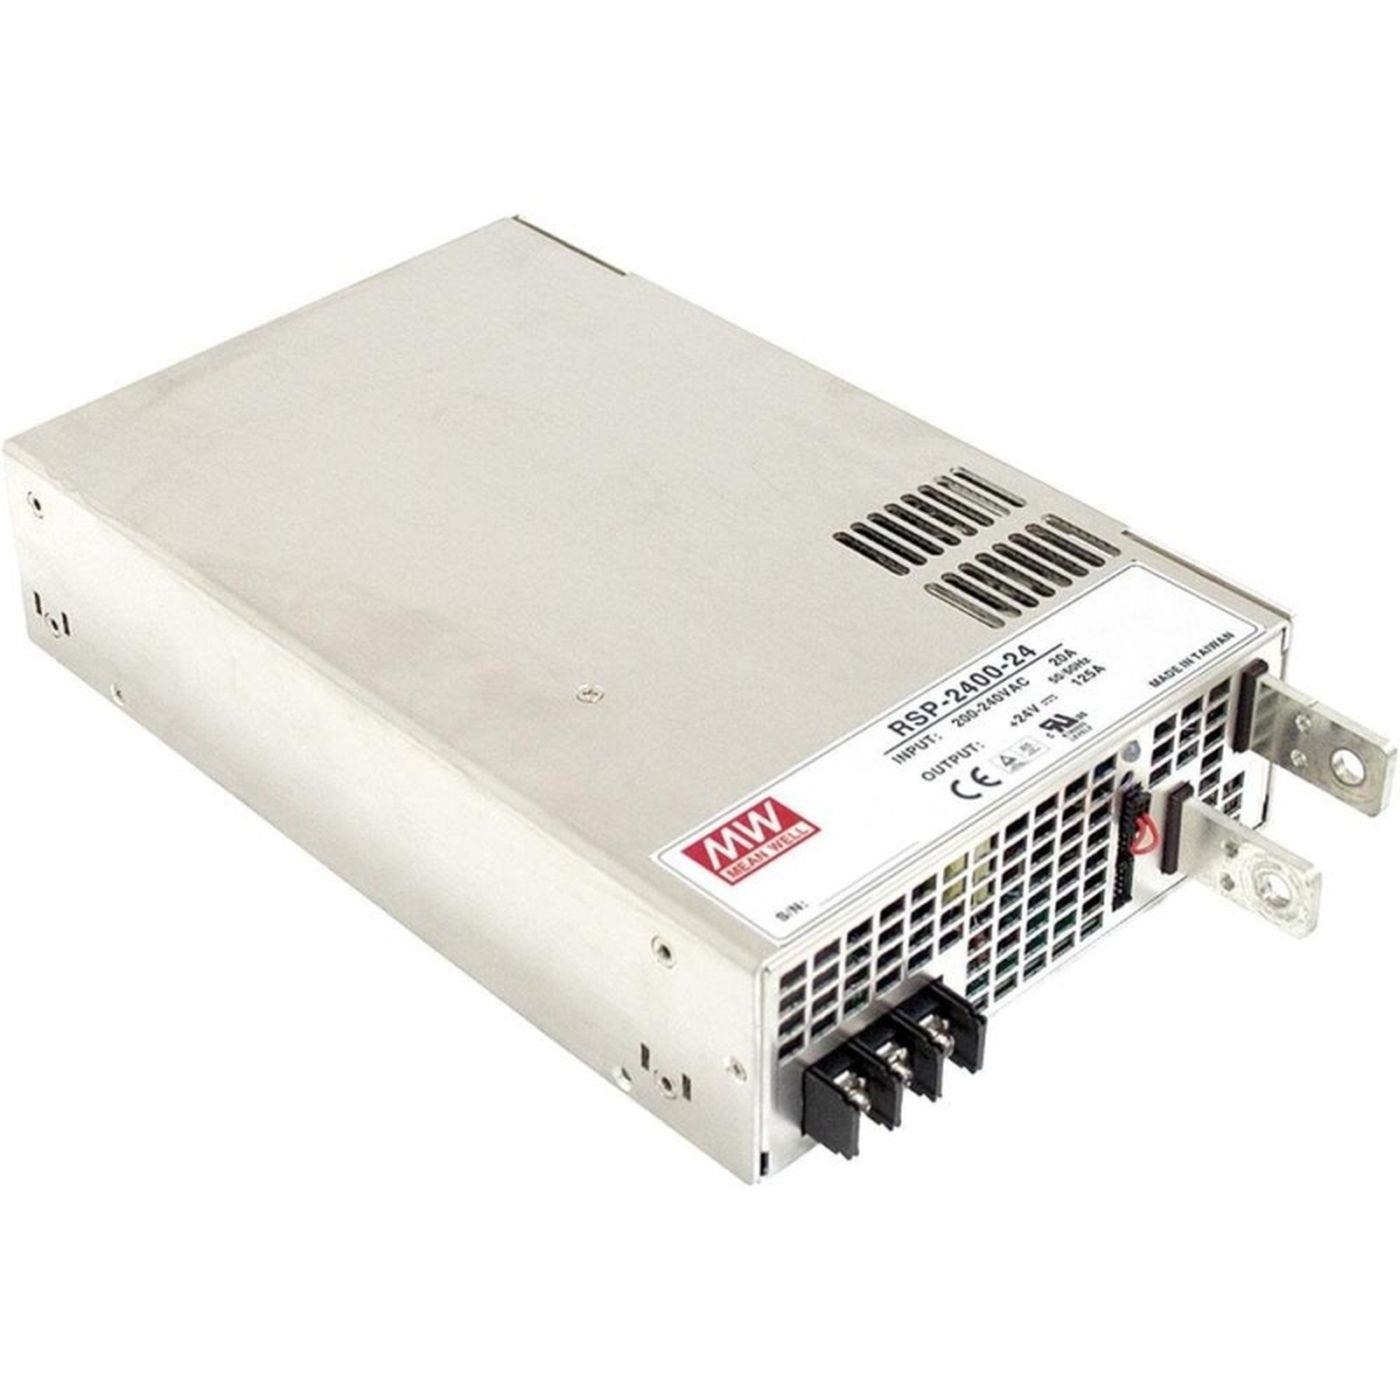 RSP-3000-48 3000W 48V 62,5A Industrial power supply